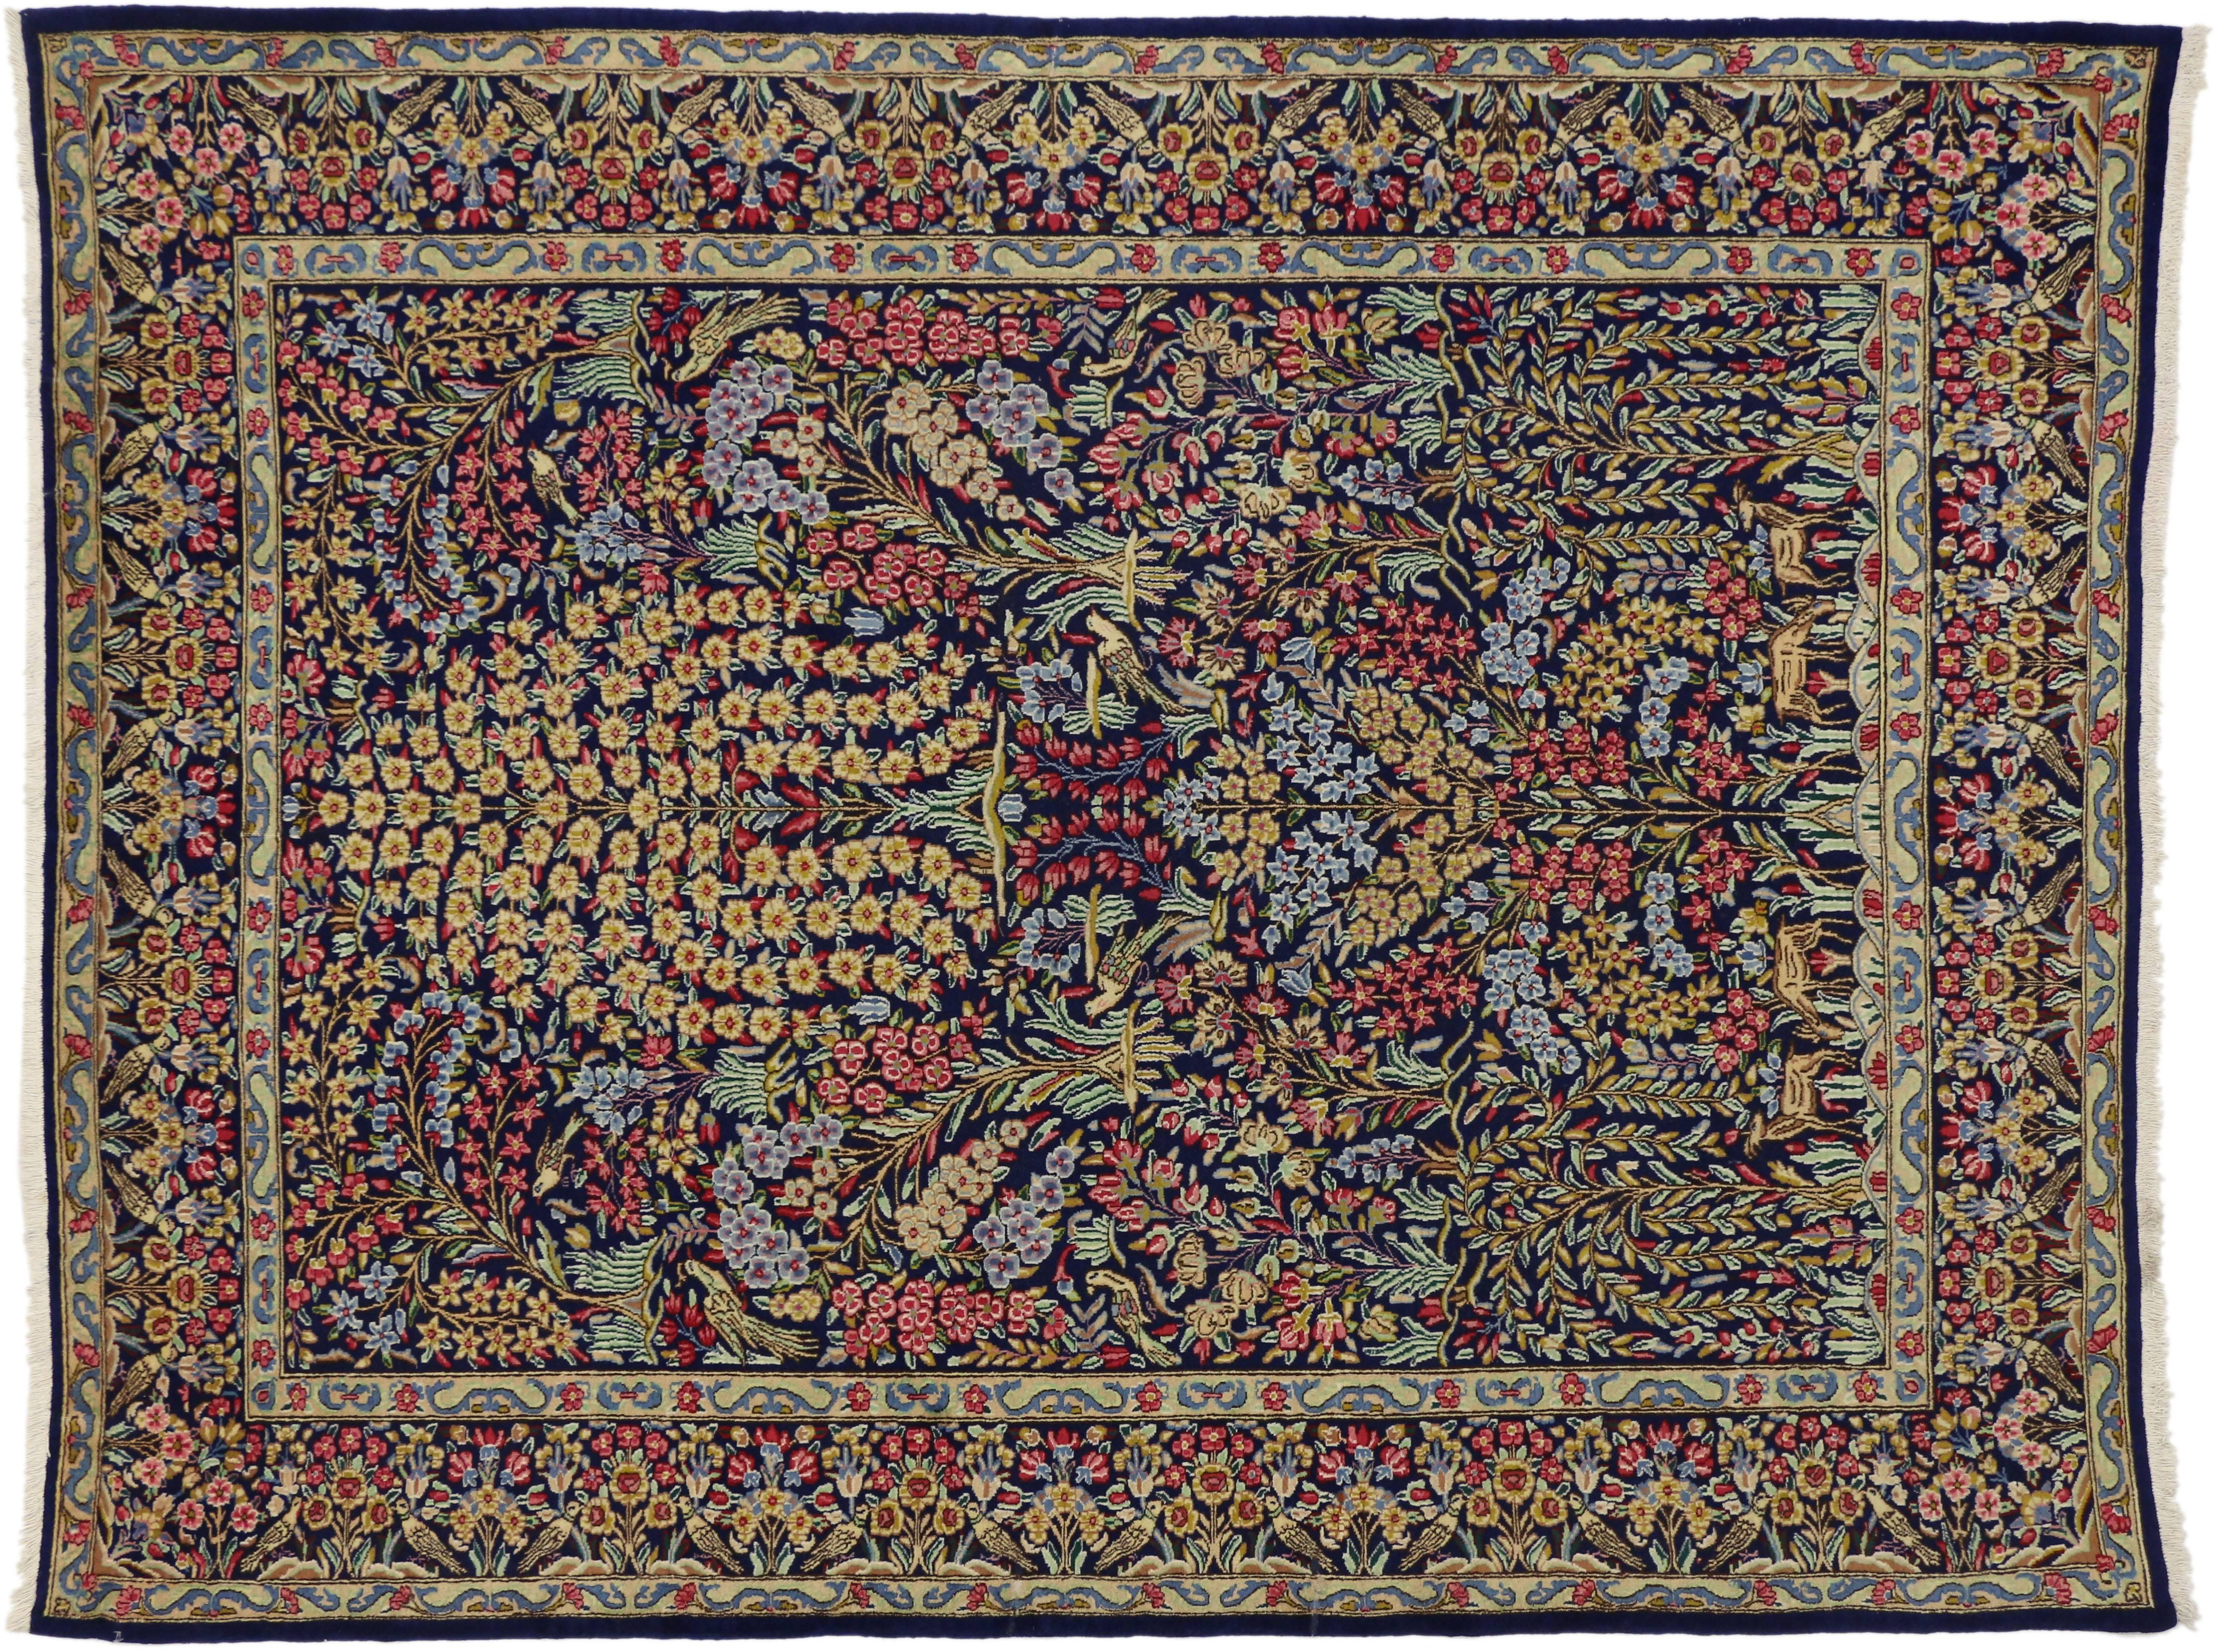 76184 Vintage Persian Kerman Rug with Garden of Paradise Design 07'04 x 09'05. This highly desirable vintage Persian Kerman rug showcases the Garden of Paradise design in vibrant color palette illuminating its lively, composition. The garden of